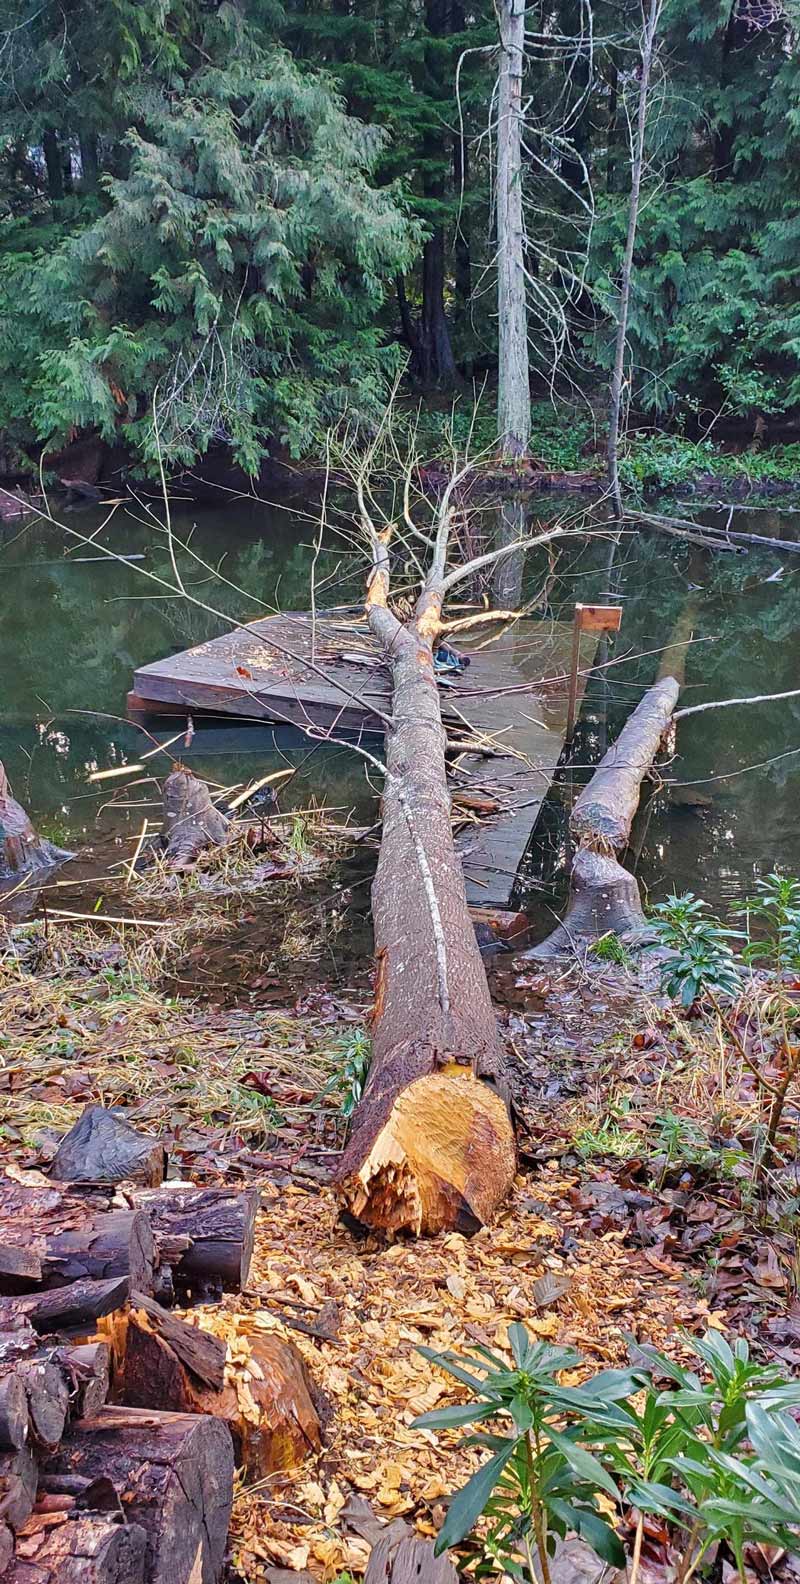 The local beaver has retaliated after his dam was removed